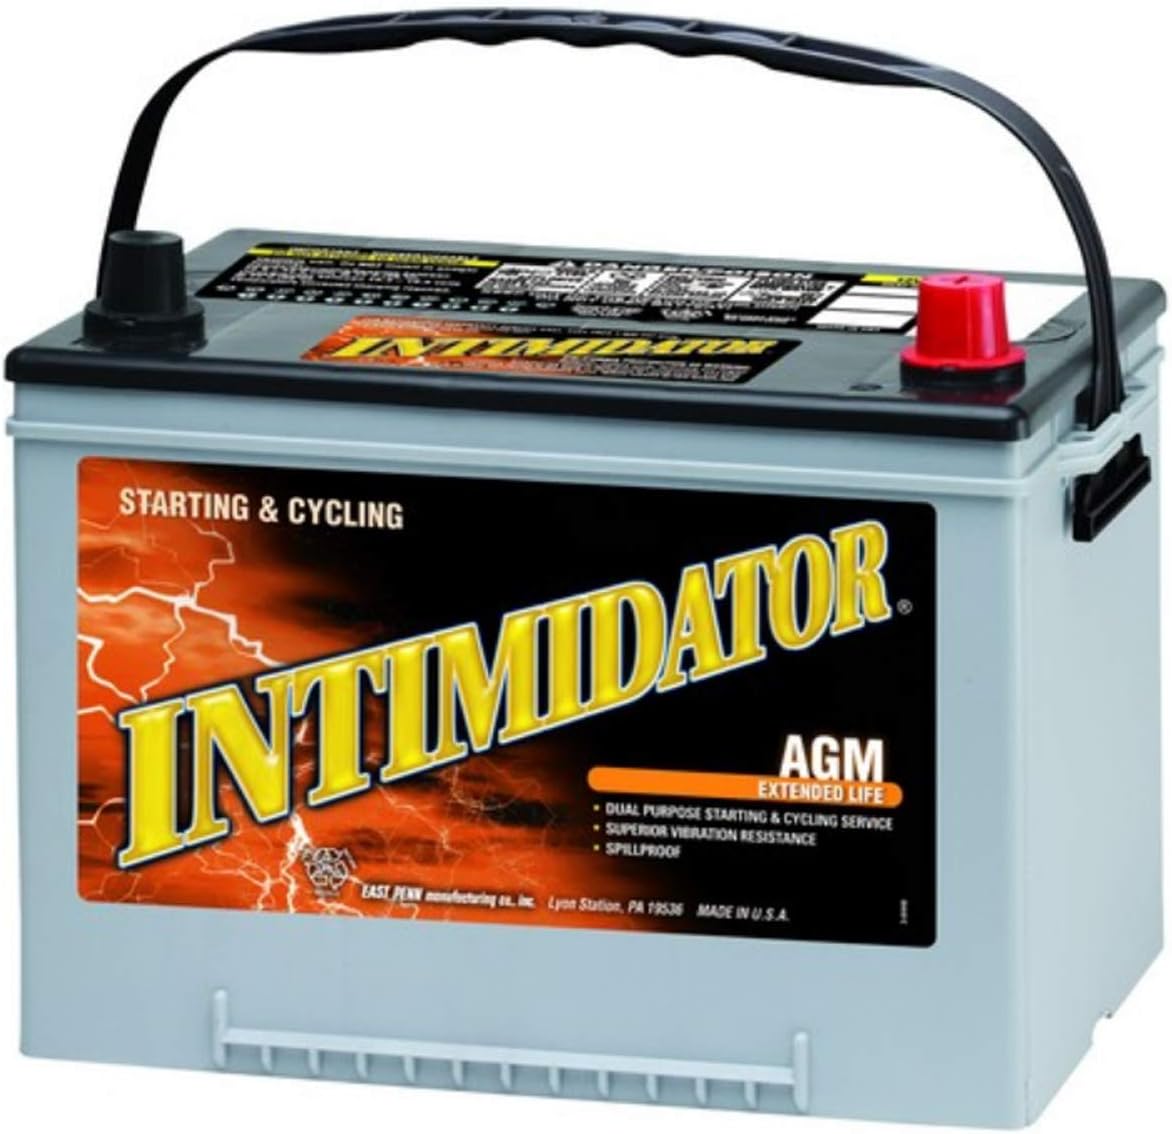 Deka 9A34R AGM Intimidator Battery Review